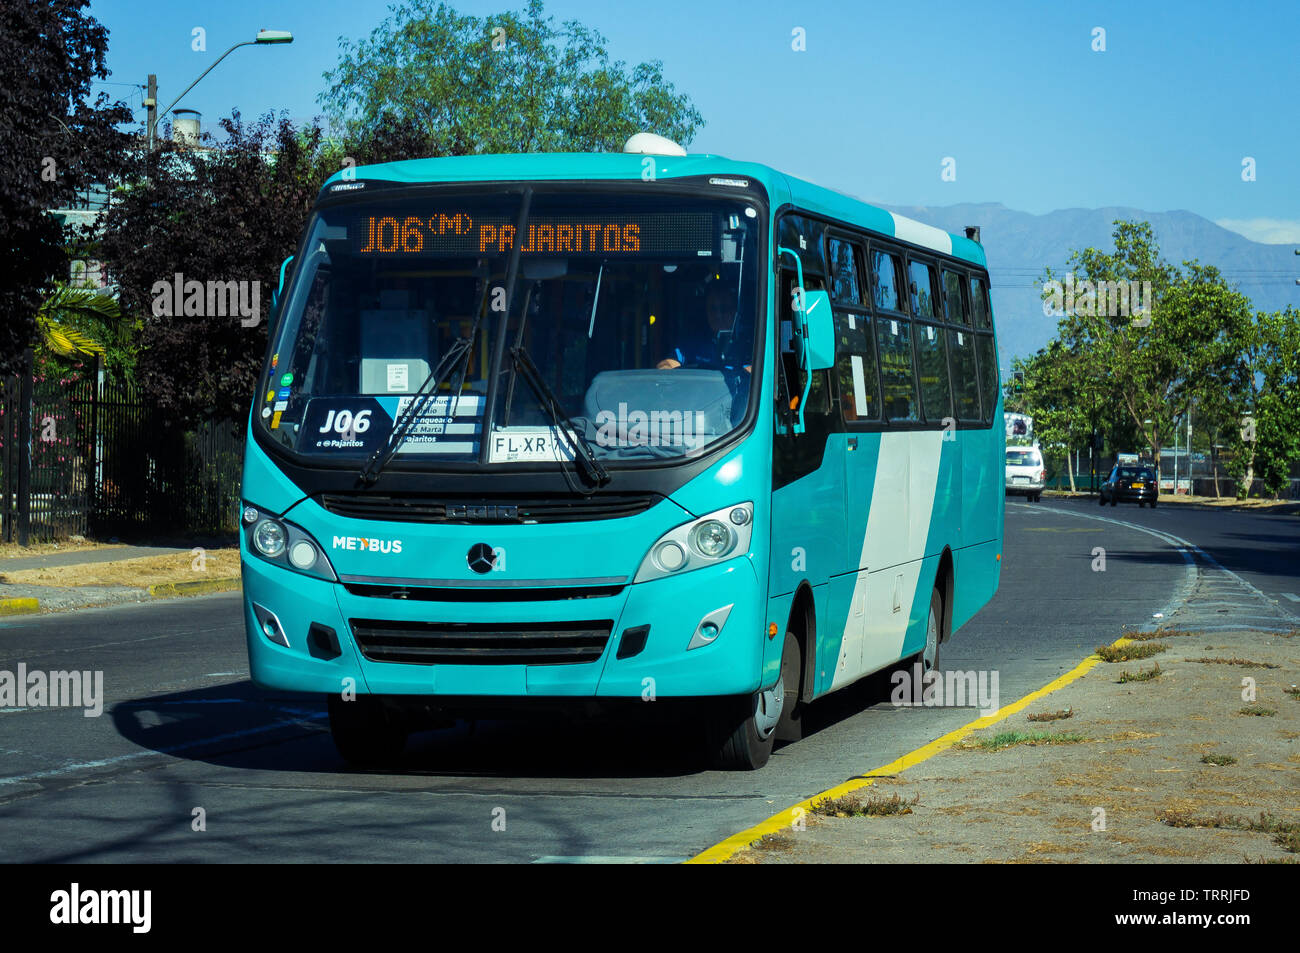 SANTIAGO, CHILE - DECEMBER 2015: A new bus for the Transantiago public system is finishing it's route Stock Photo